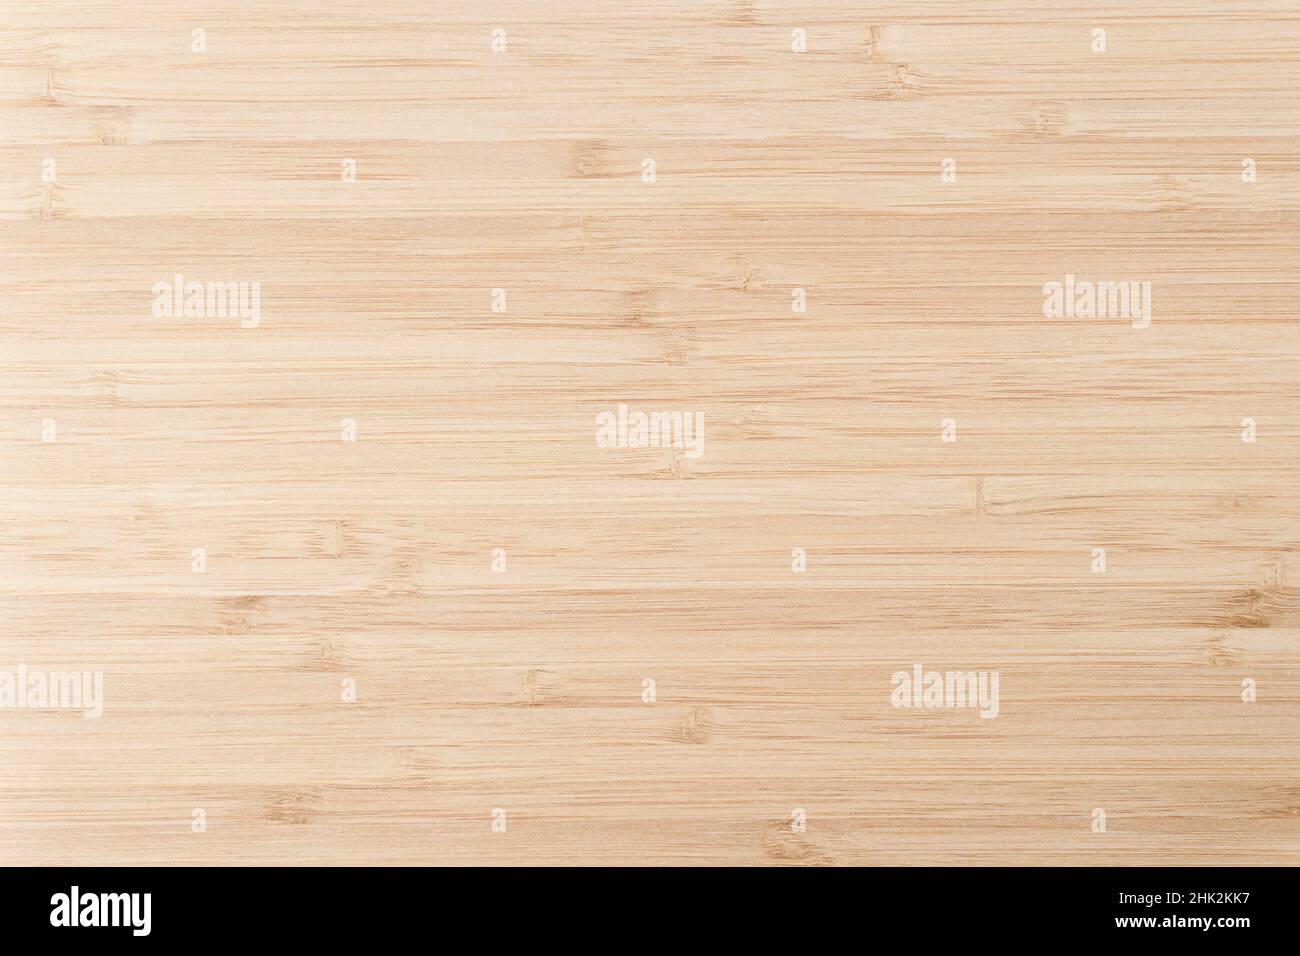 Bamboo wood surface with texture and pattern. Light bamboo background for decorating furniture, walls, floors, tables, interiors. High quality photo Stock Photo